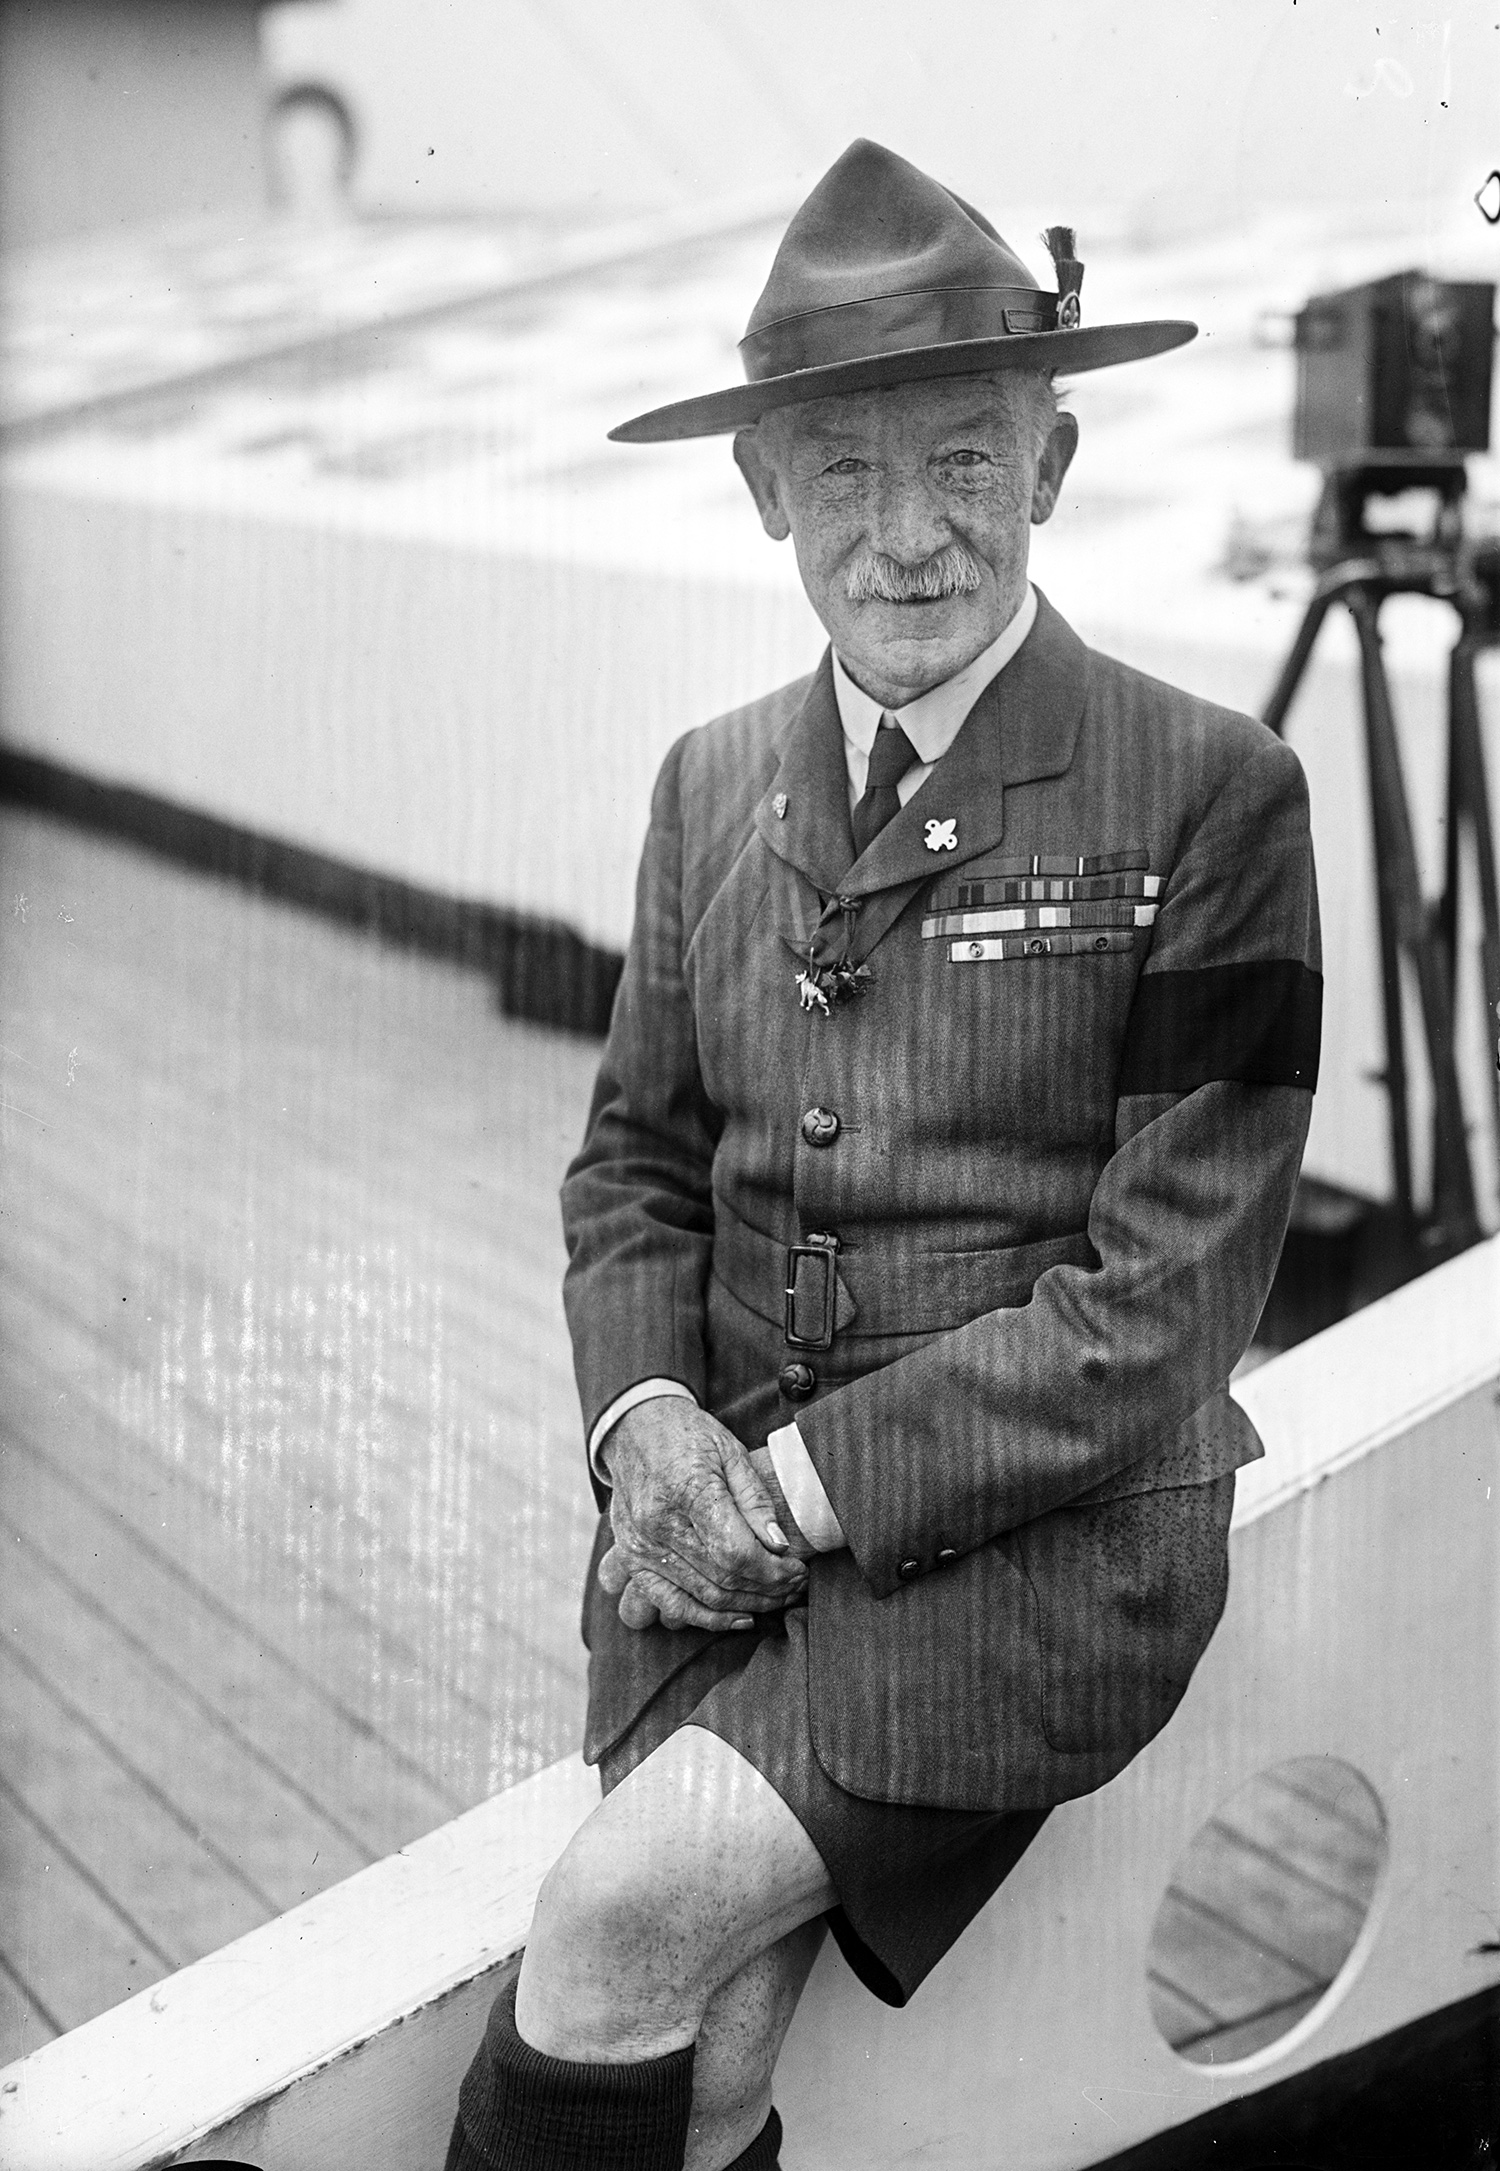 Robert Baden-Powell, smiling, in uniform and wearing military decorations on his chest and a wide-brimmed hat, photographed on the roof of a building.